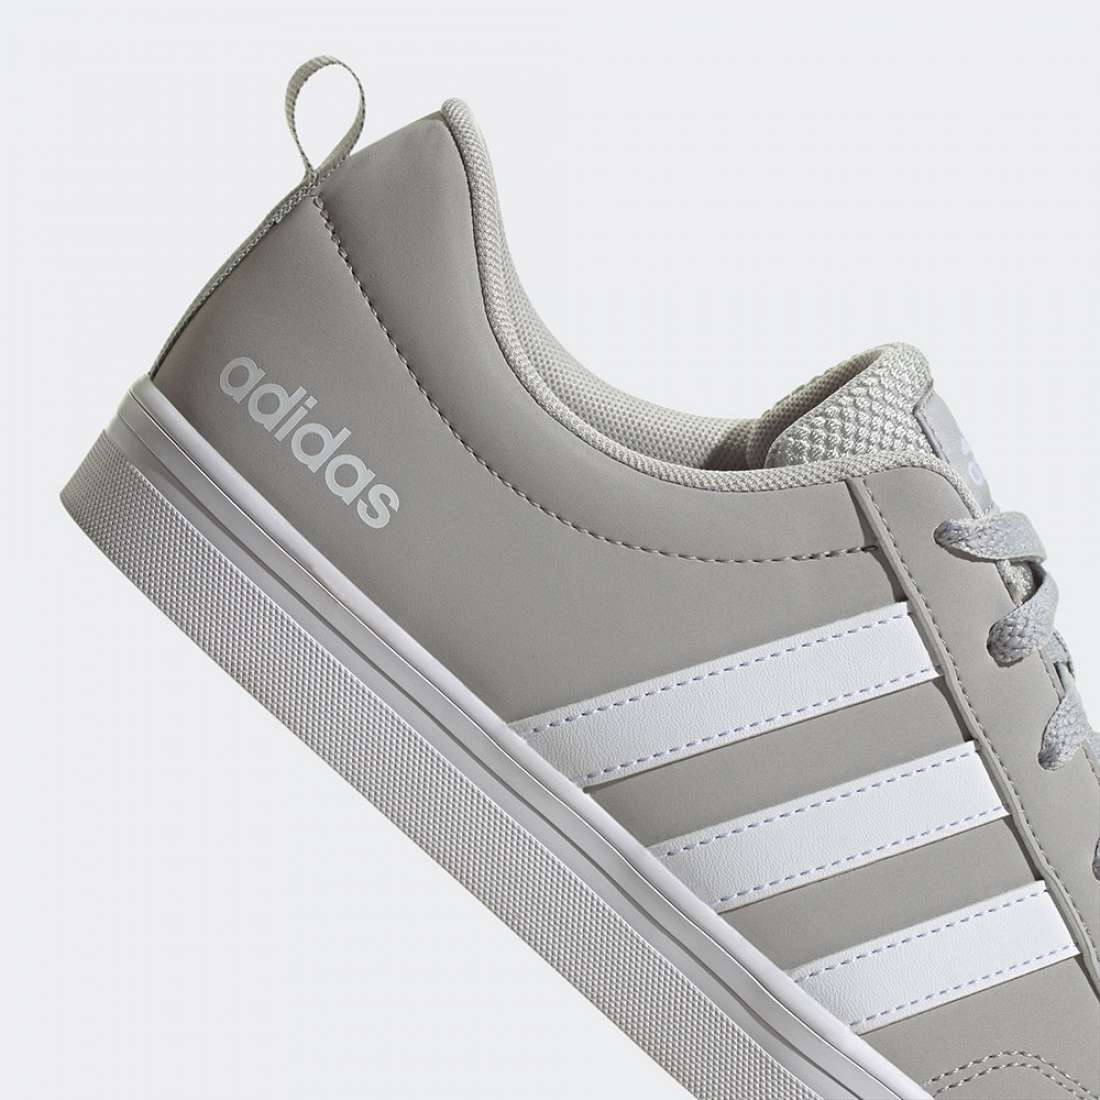 ADIDAS VS PACE 2.0 GRETWO/FTWWHT/FTWWHT